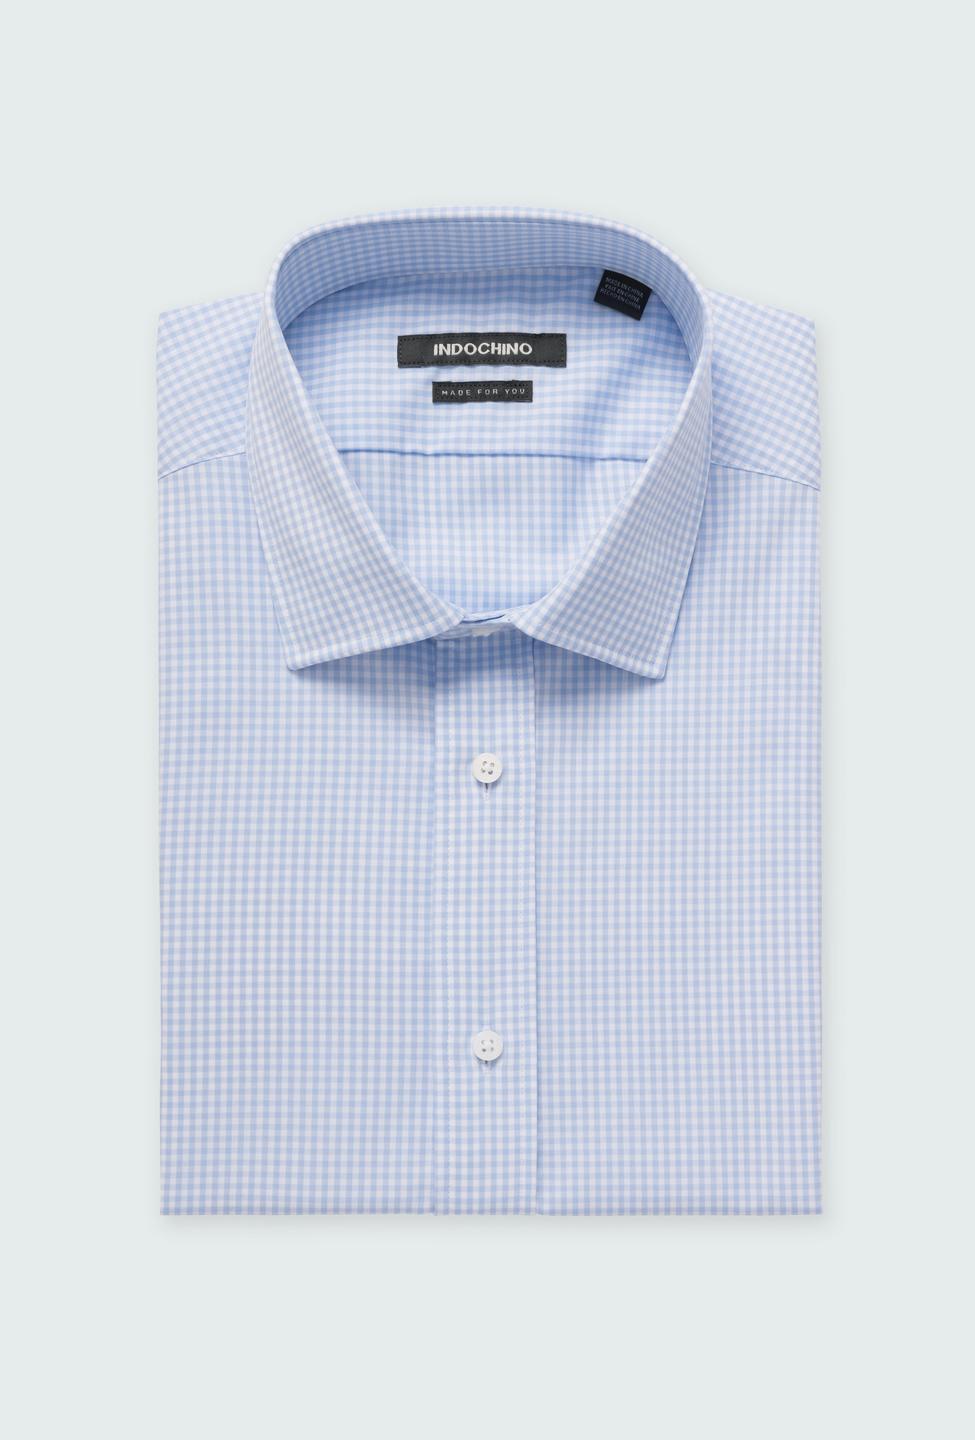 Blue shirt - Helston Checked Design from Premium Indochino Collection